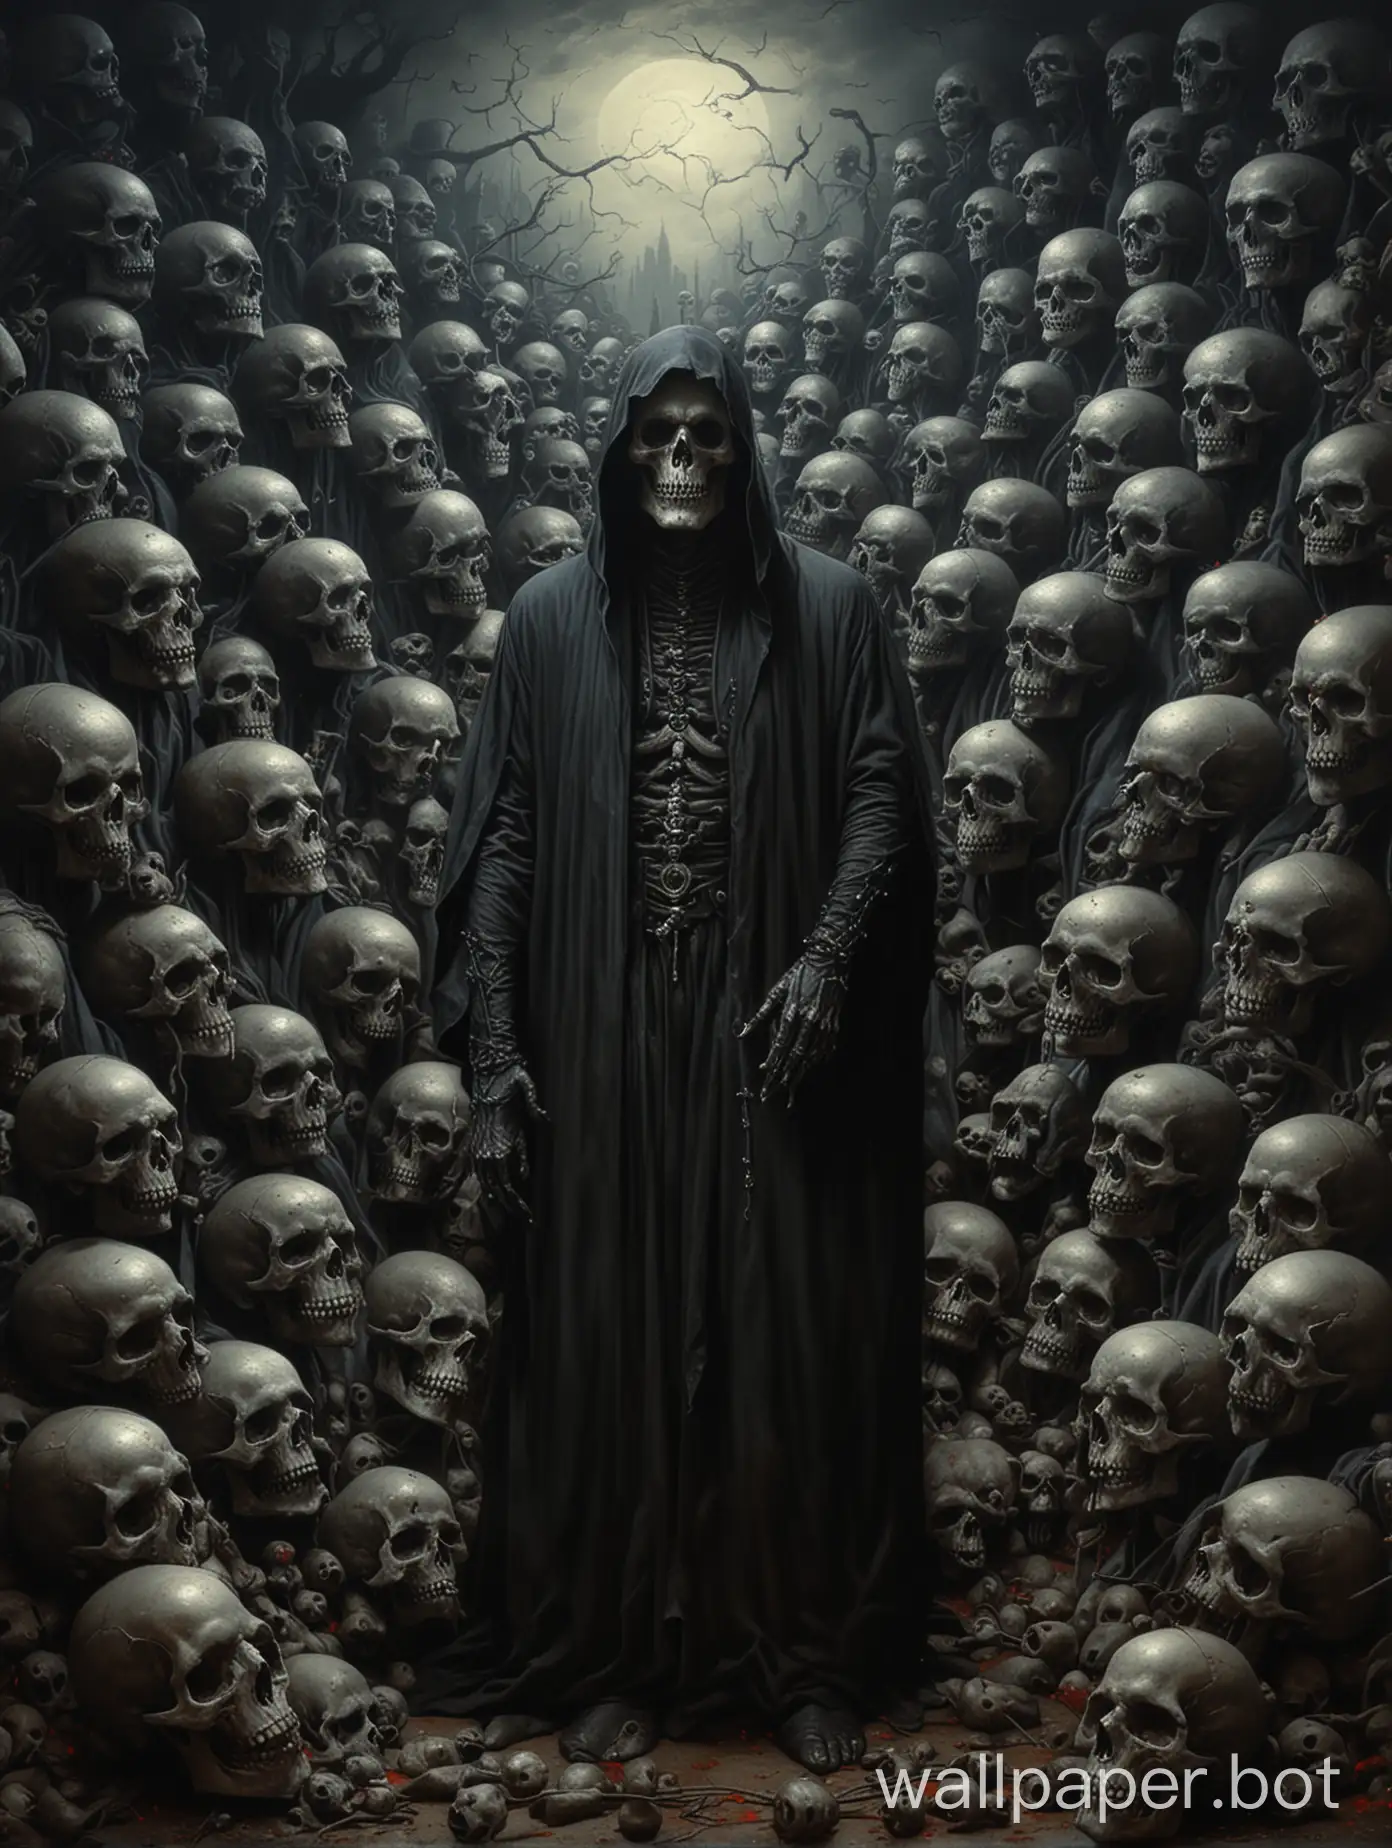 a painting of a man in a black robe surrounded by skulls, just art for dark metal music, death metal album cover, detailed 3d gothic oil painting, reminded me of the grim reaper, dark art style, dark fantasy horror art, evil death, dark fantasy artwork, eerie and grim art style, black metal style, dark fantasy mixed with realism, hell scape , inspired by beksinski